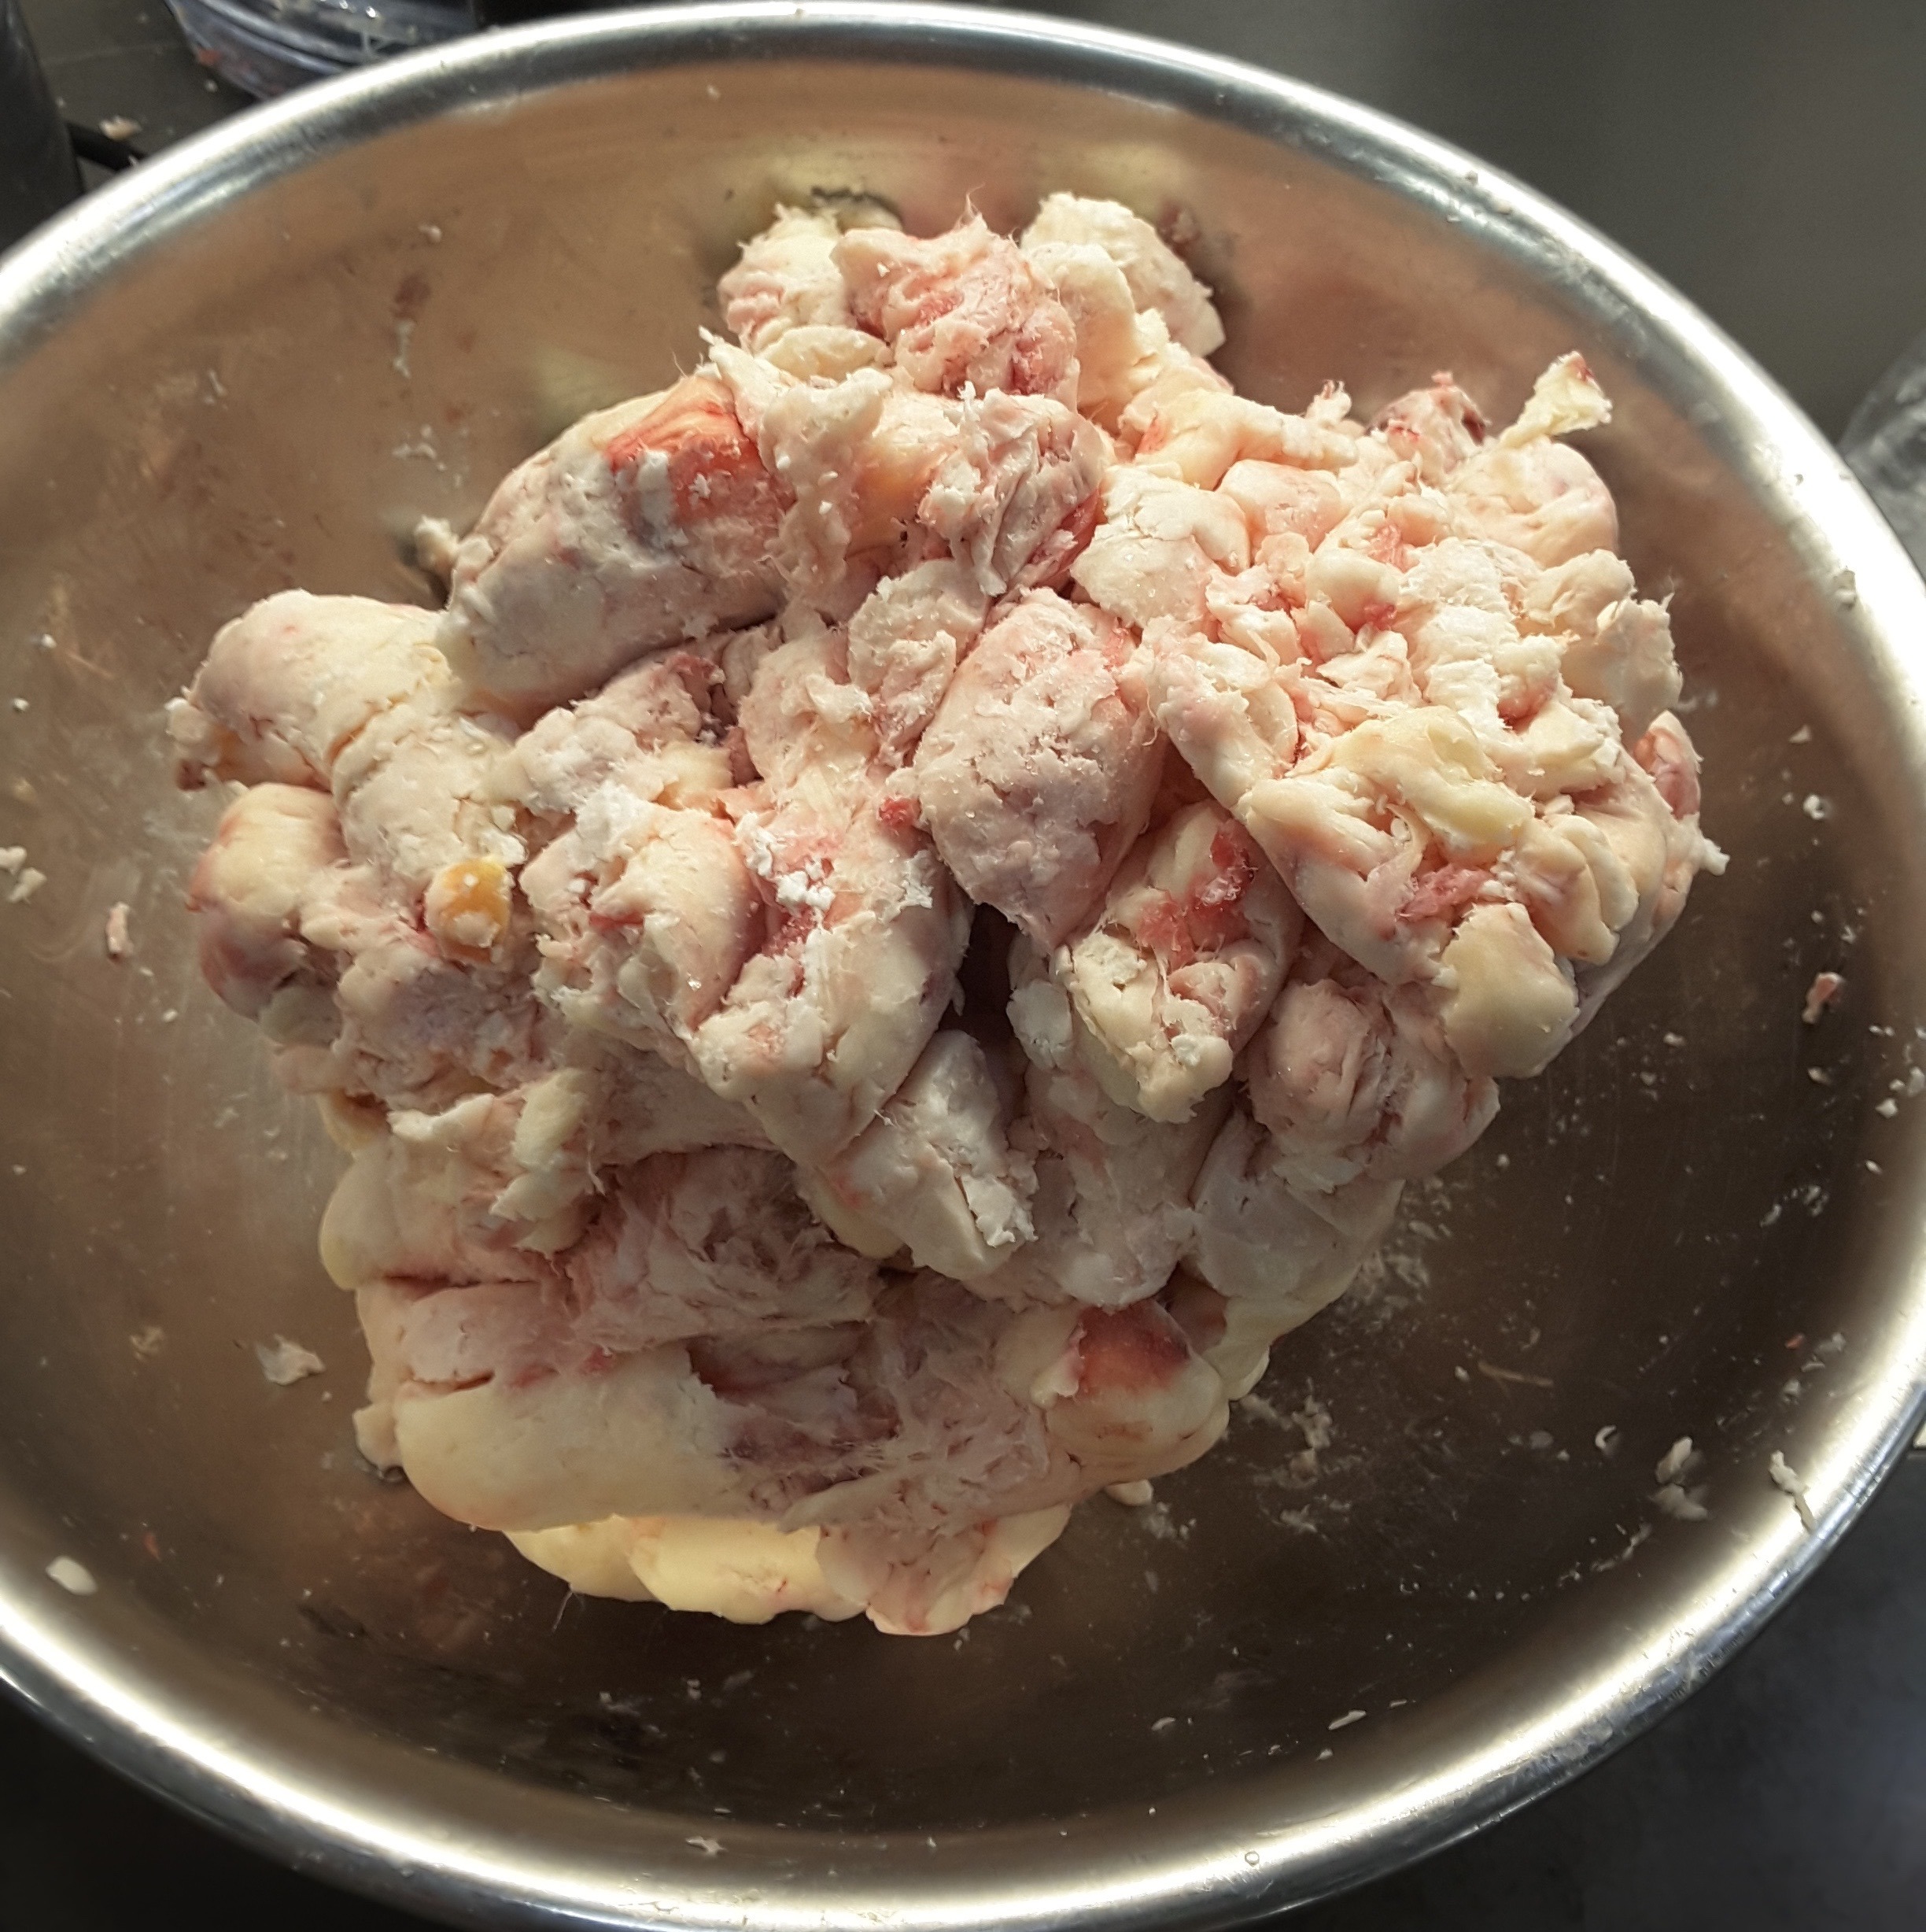 Beef suet for rendering tallow